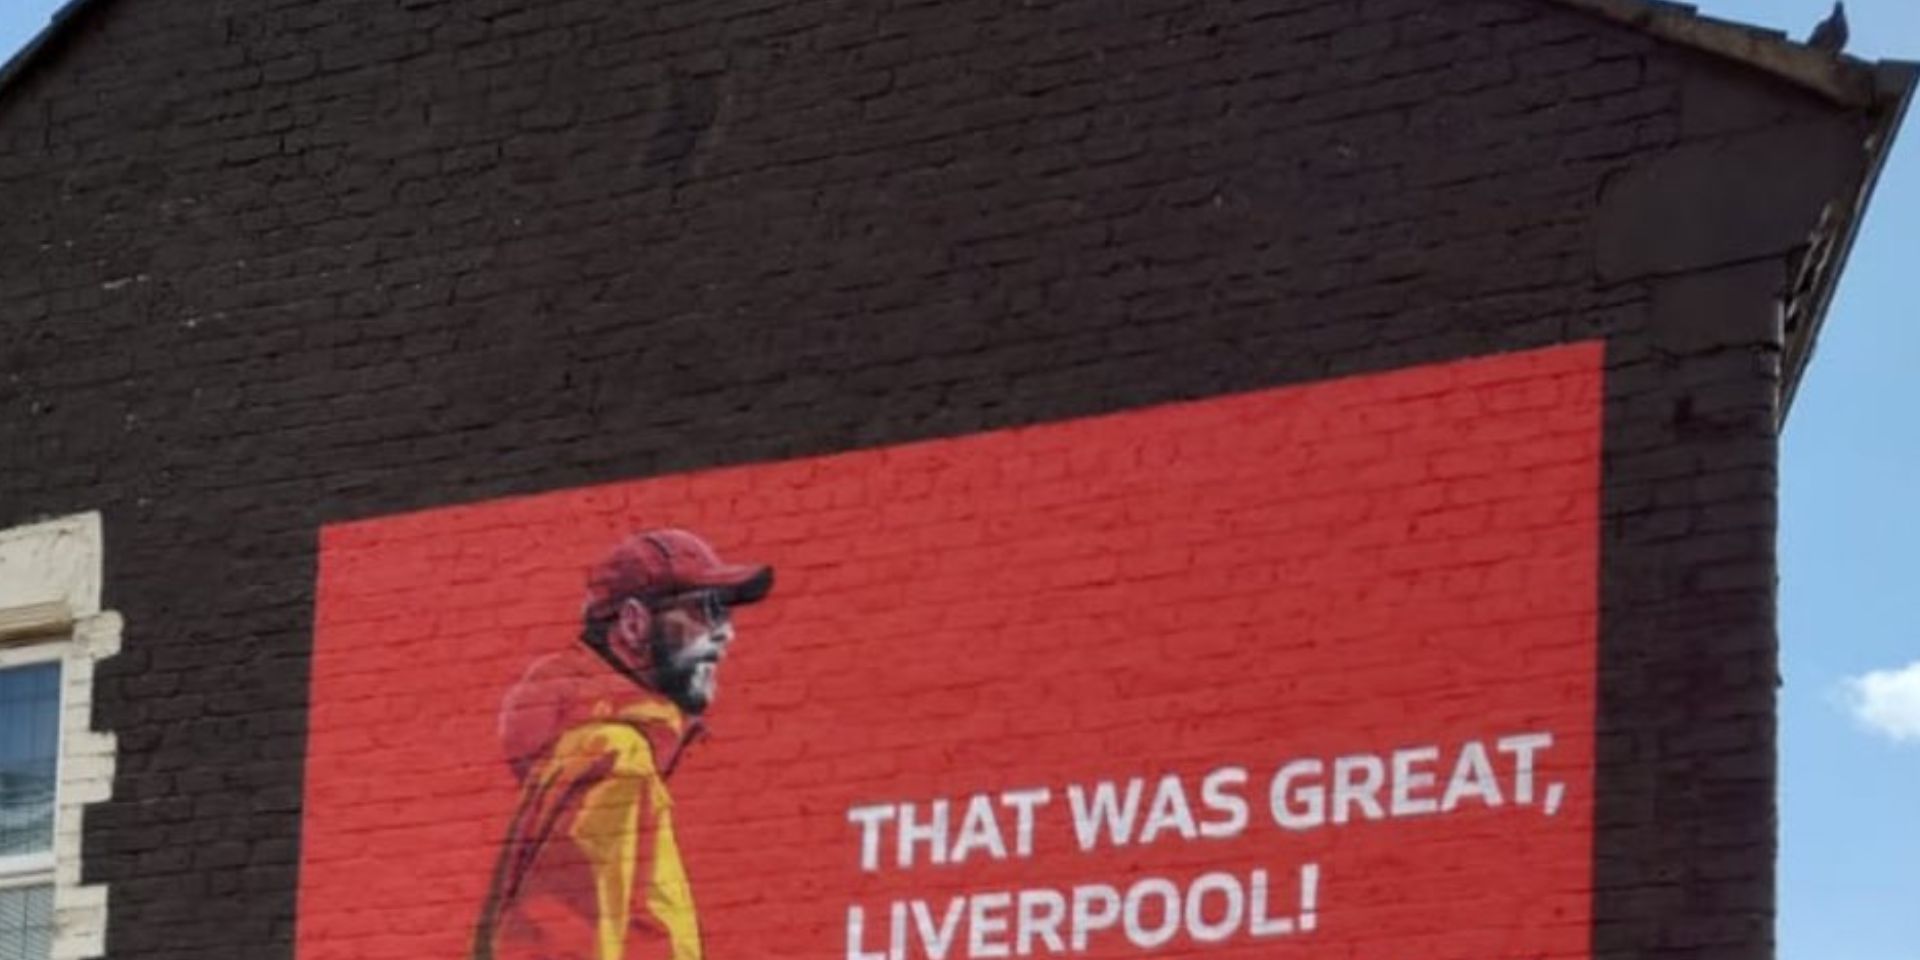 (Image) Jurgen Klopp’s newest mural completed by German financial coaches